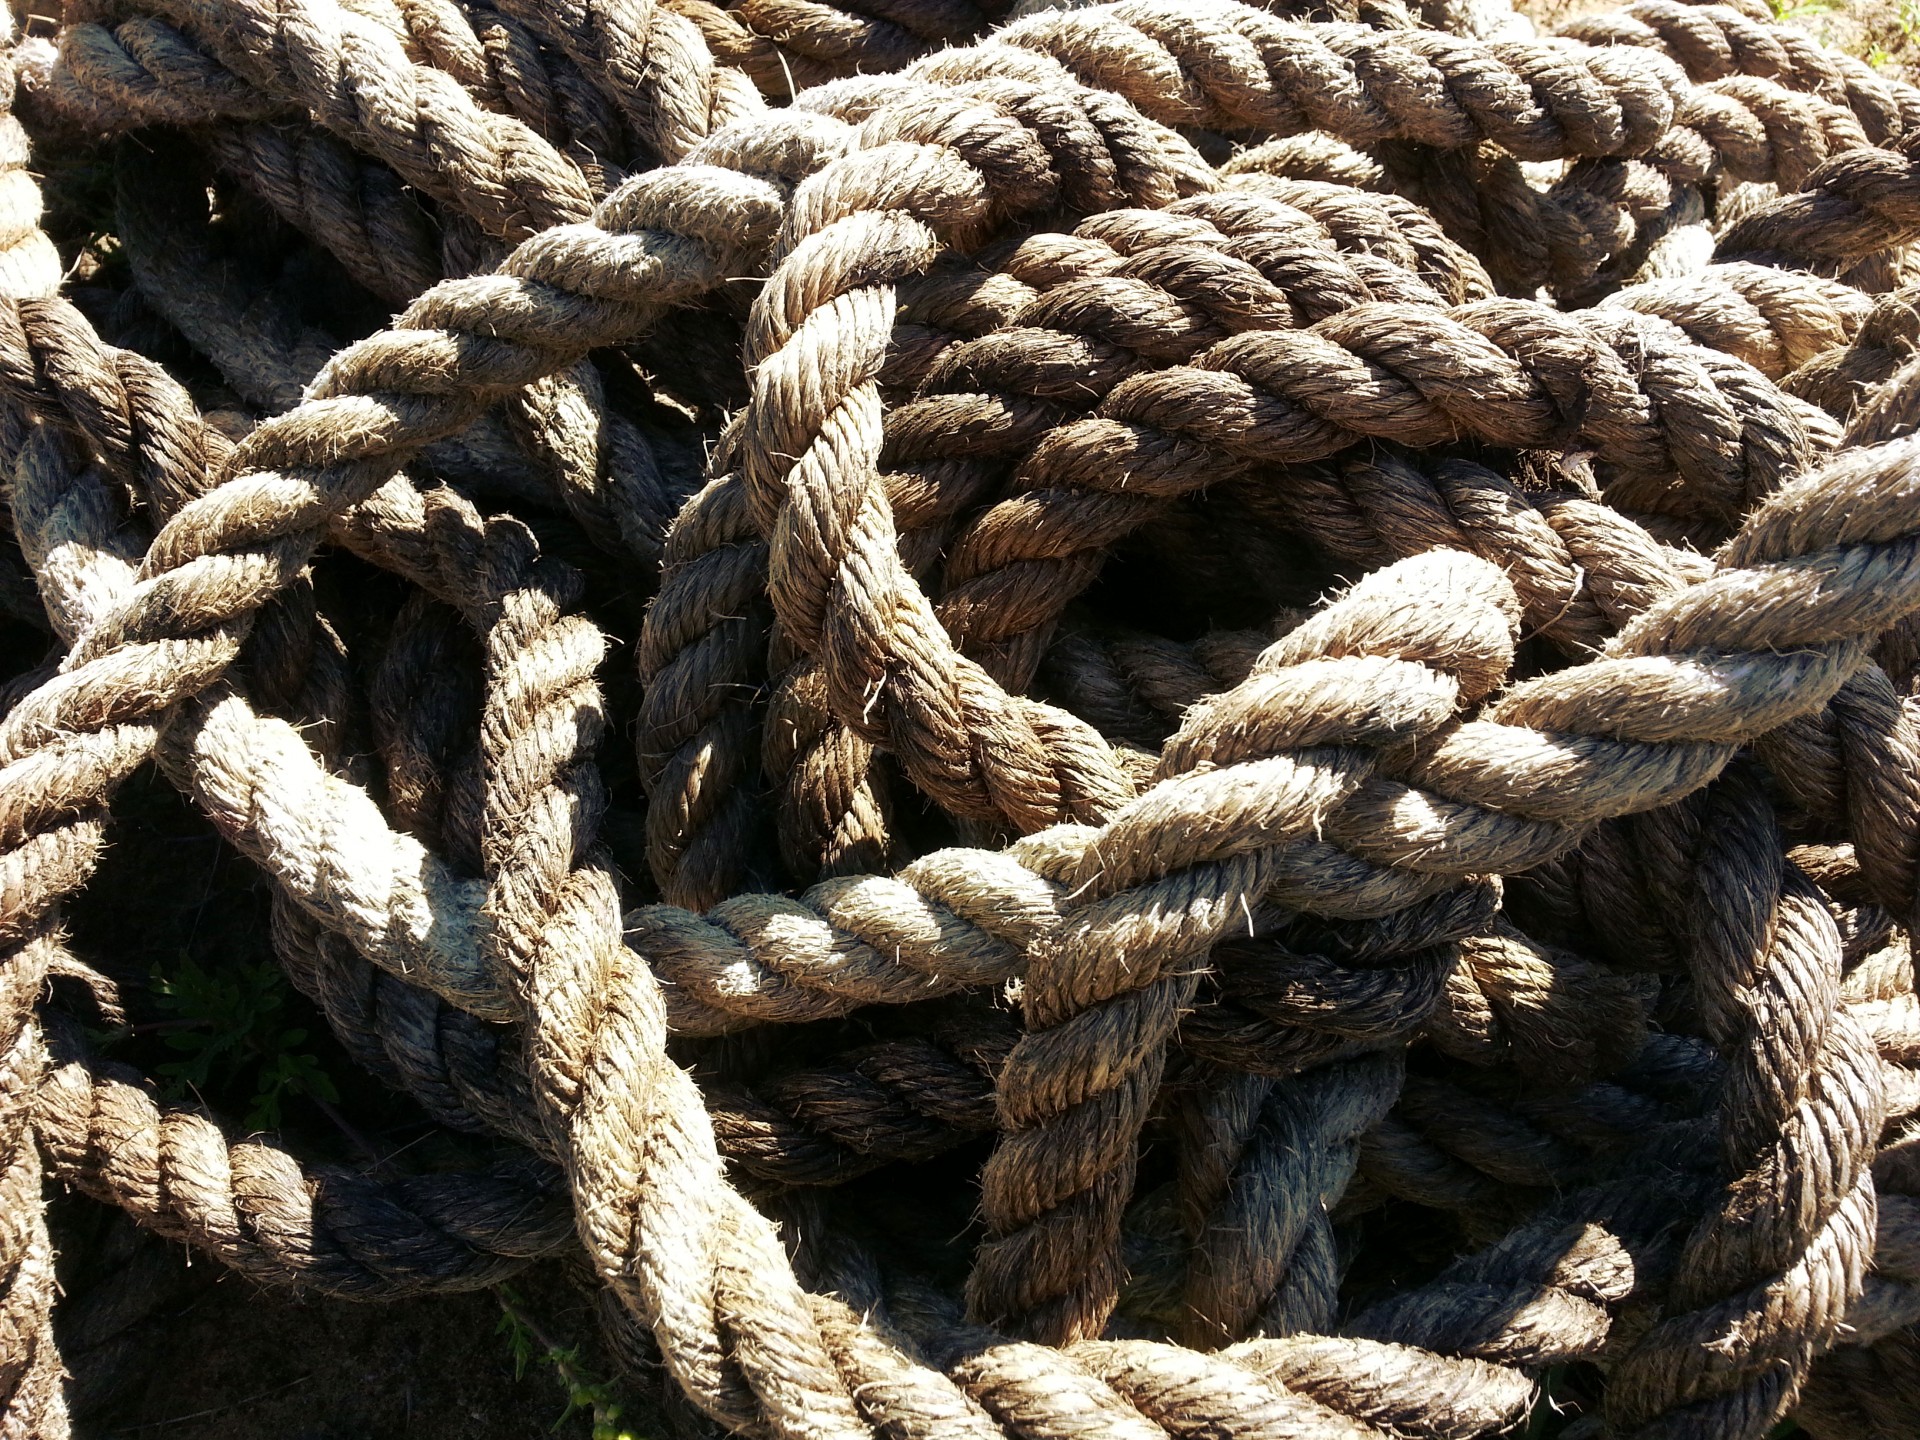 View of long rope